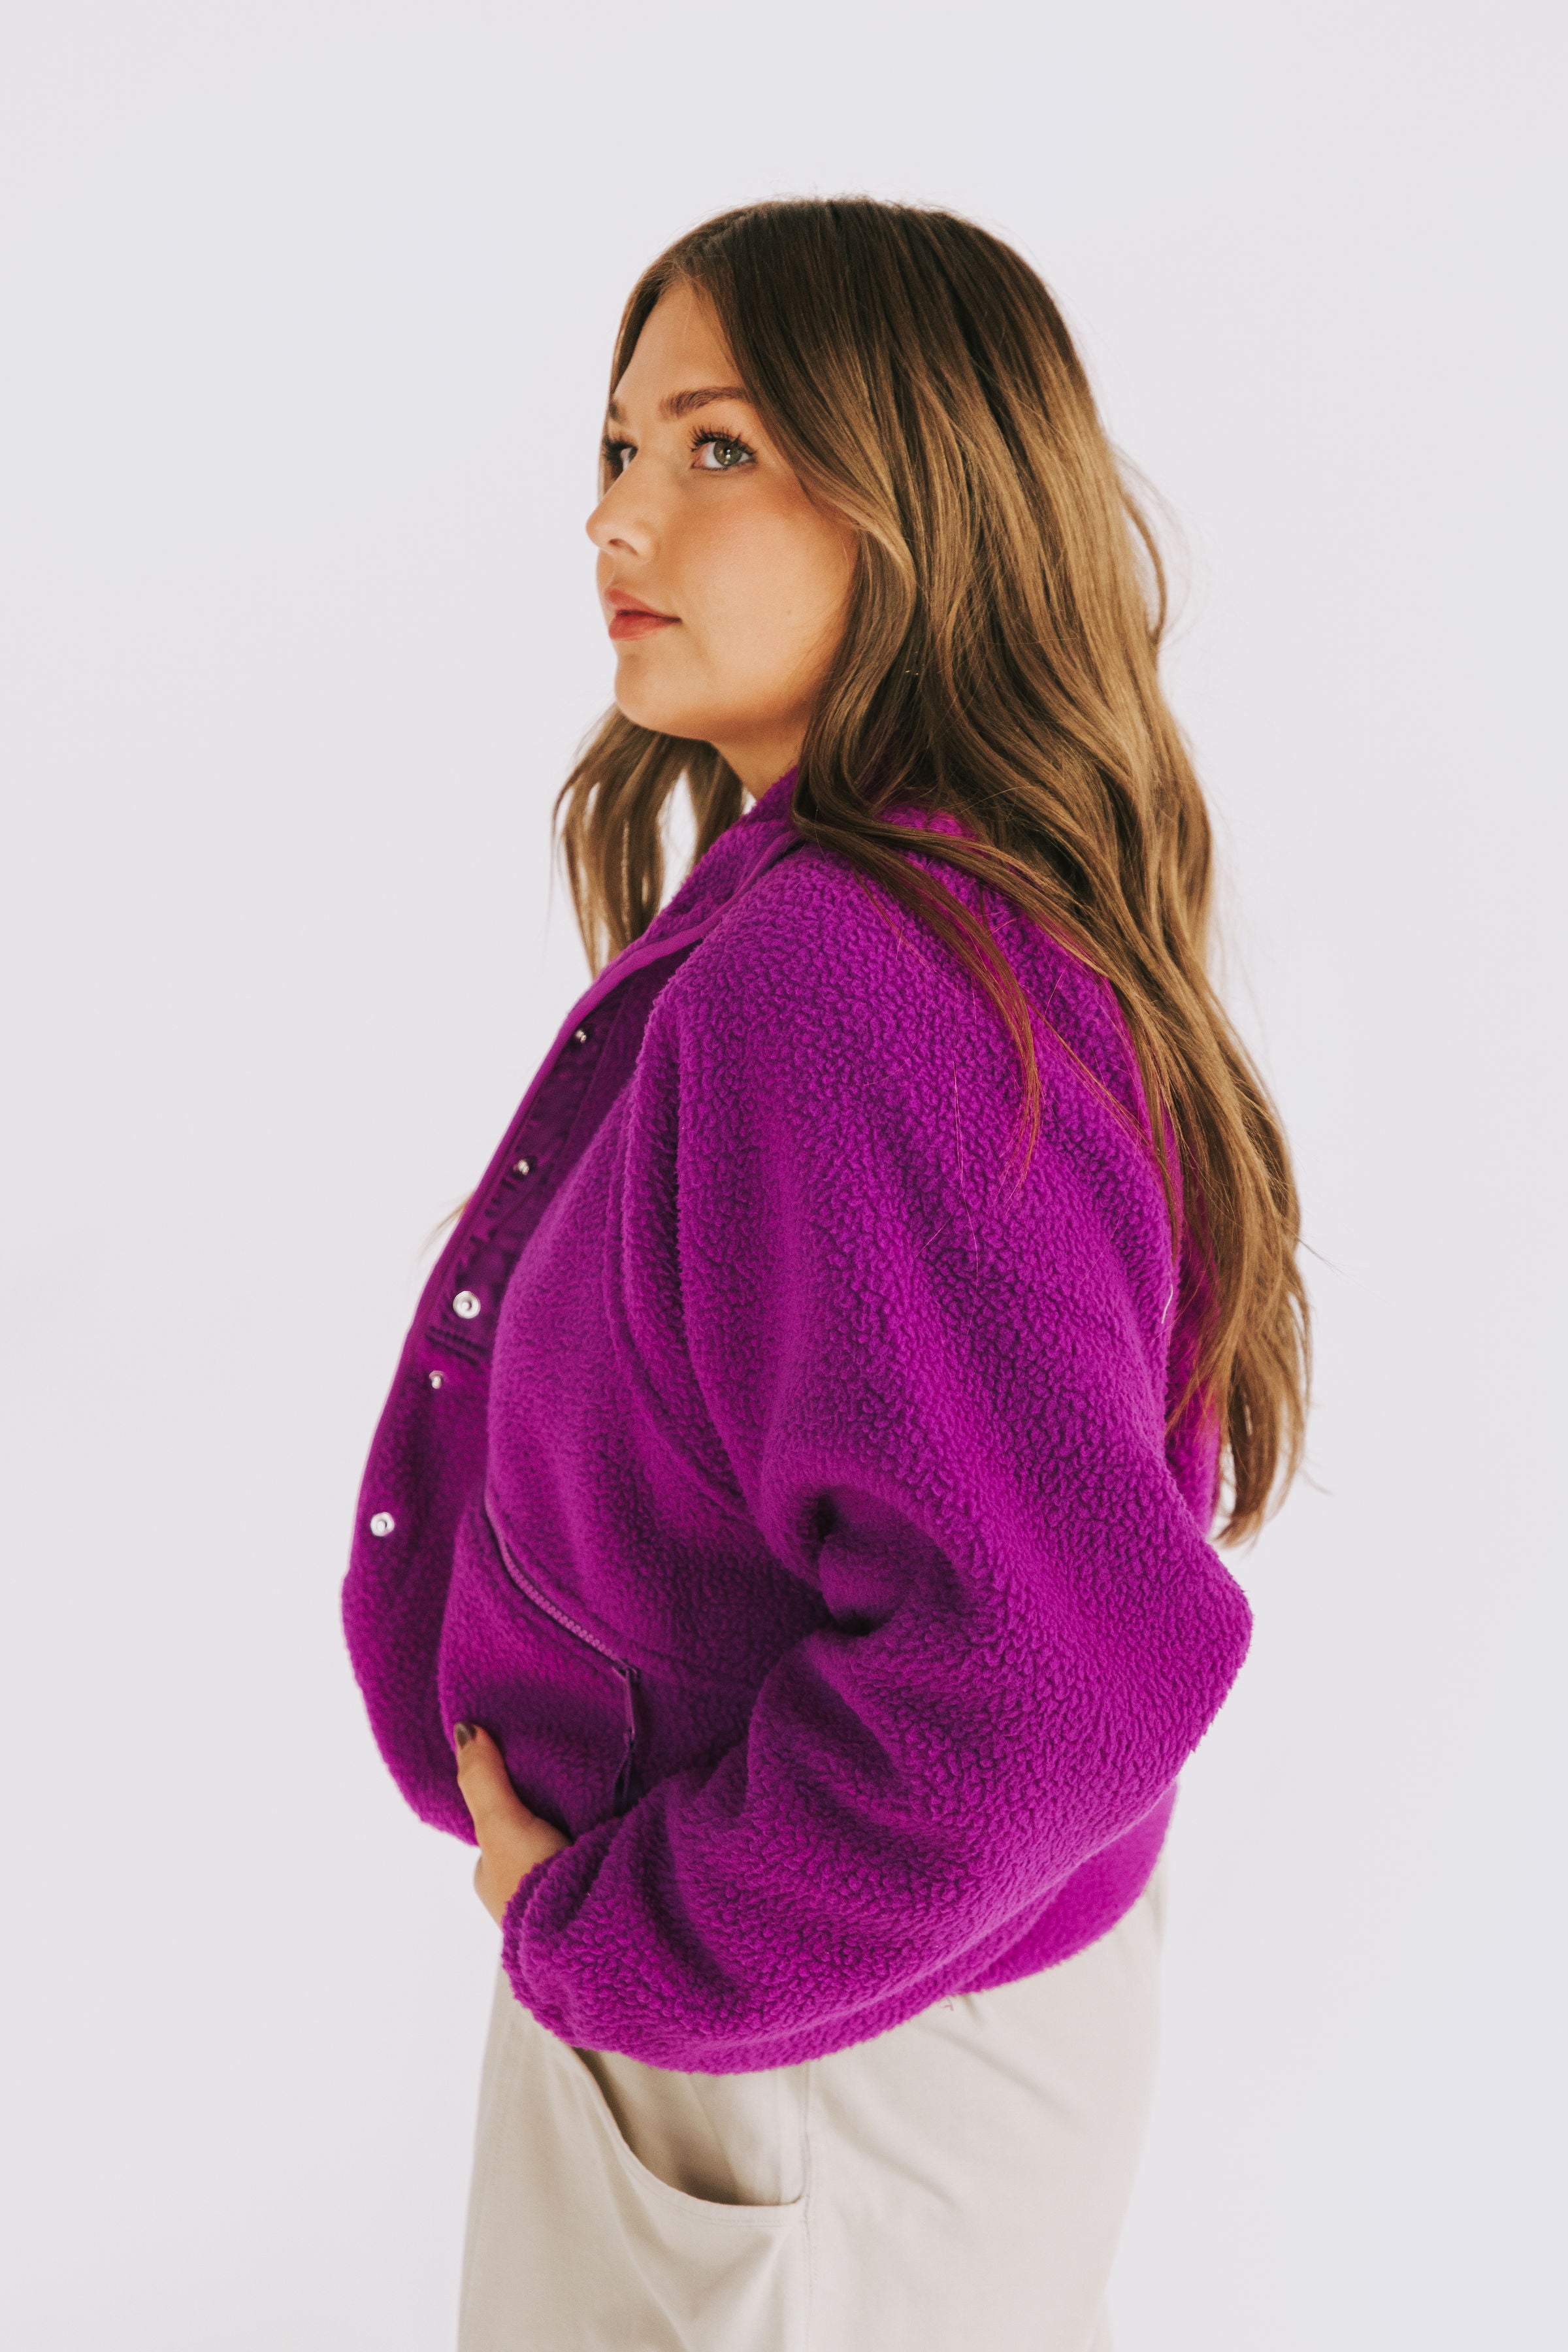 FREE PEOPLE - Hit The Slopes Fleece Jacket - 2 Colors!